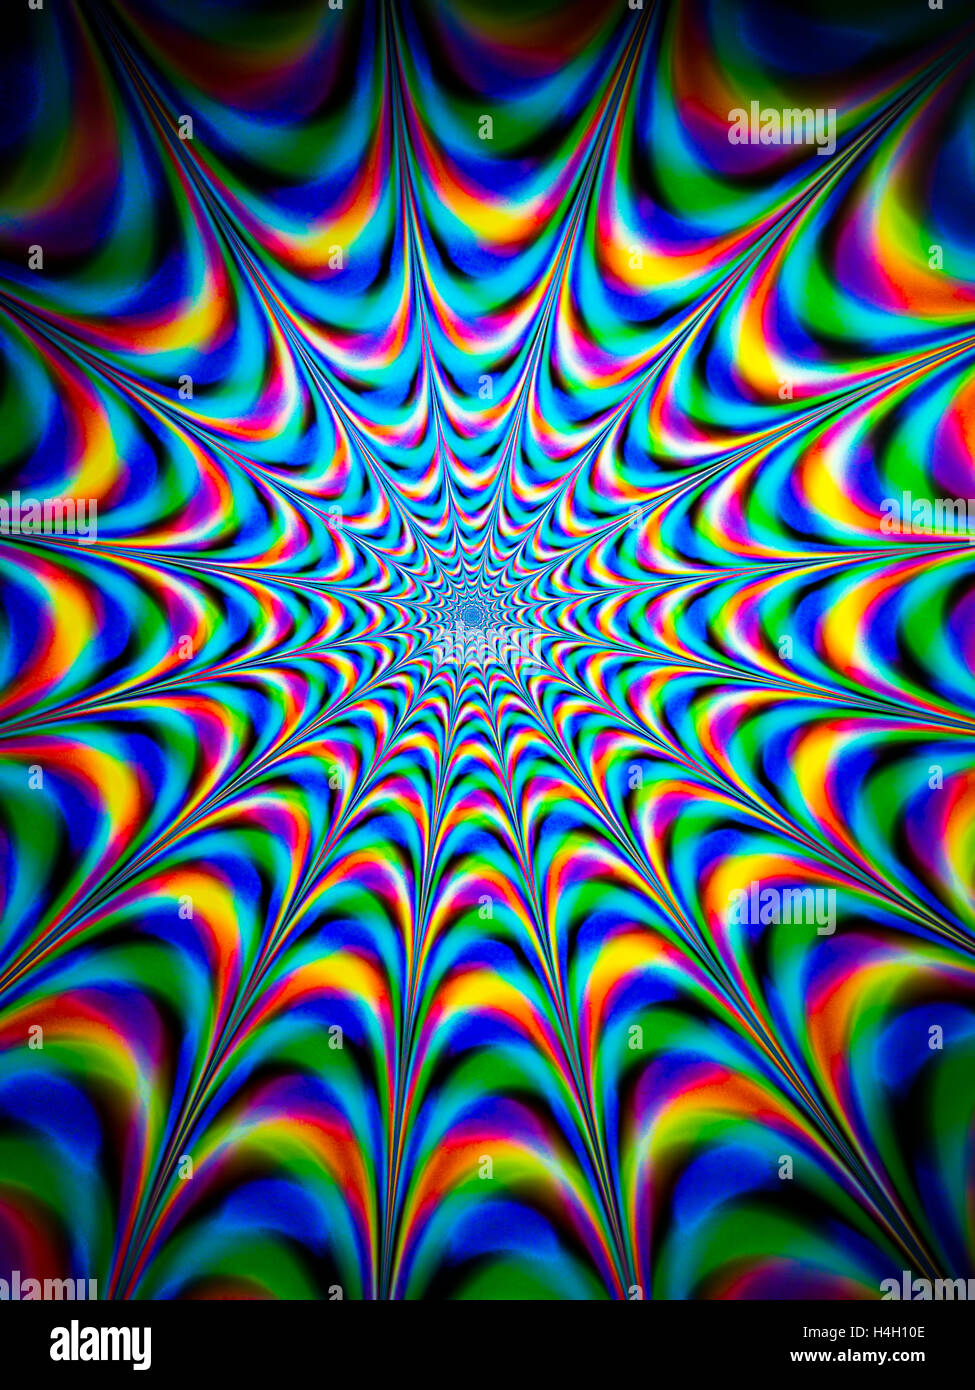 Full 4K Collection of Over 999 Psychedelic Images: Unbelievable Assortment